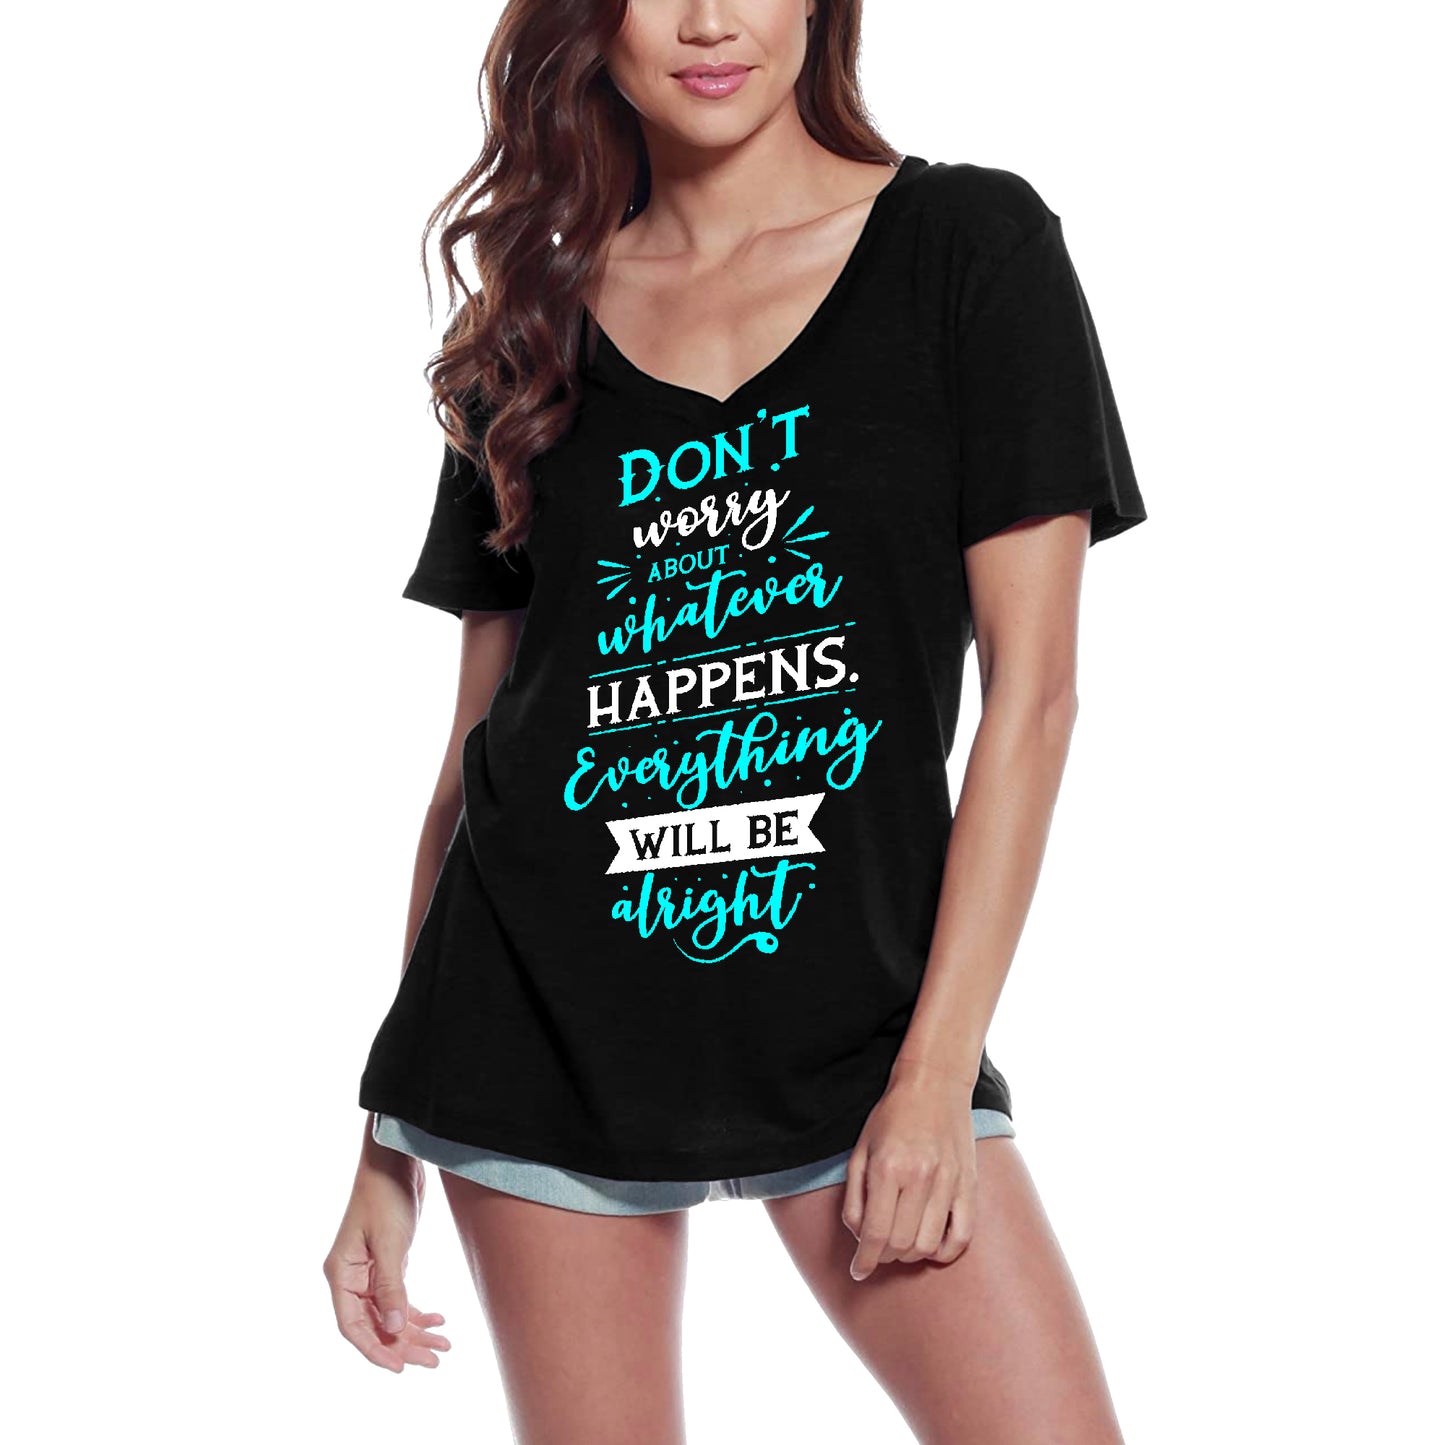 ULTRABASIC Women's Graphic T-Shirt Everything Will Be Alright - Religious Shirt